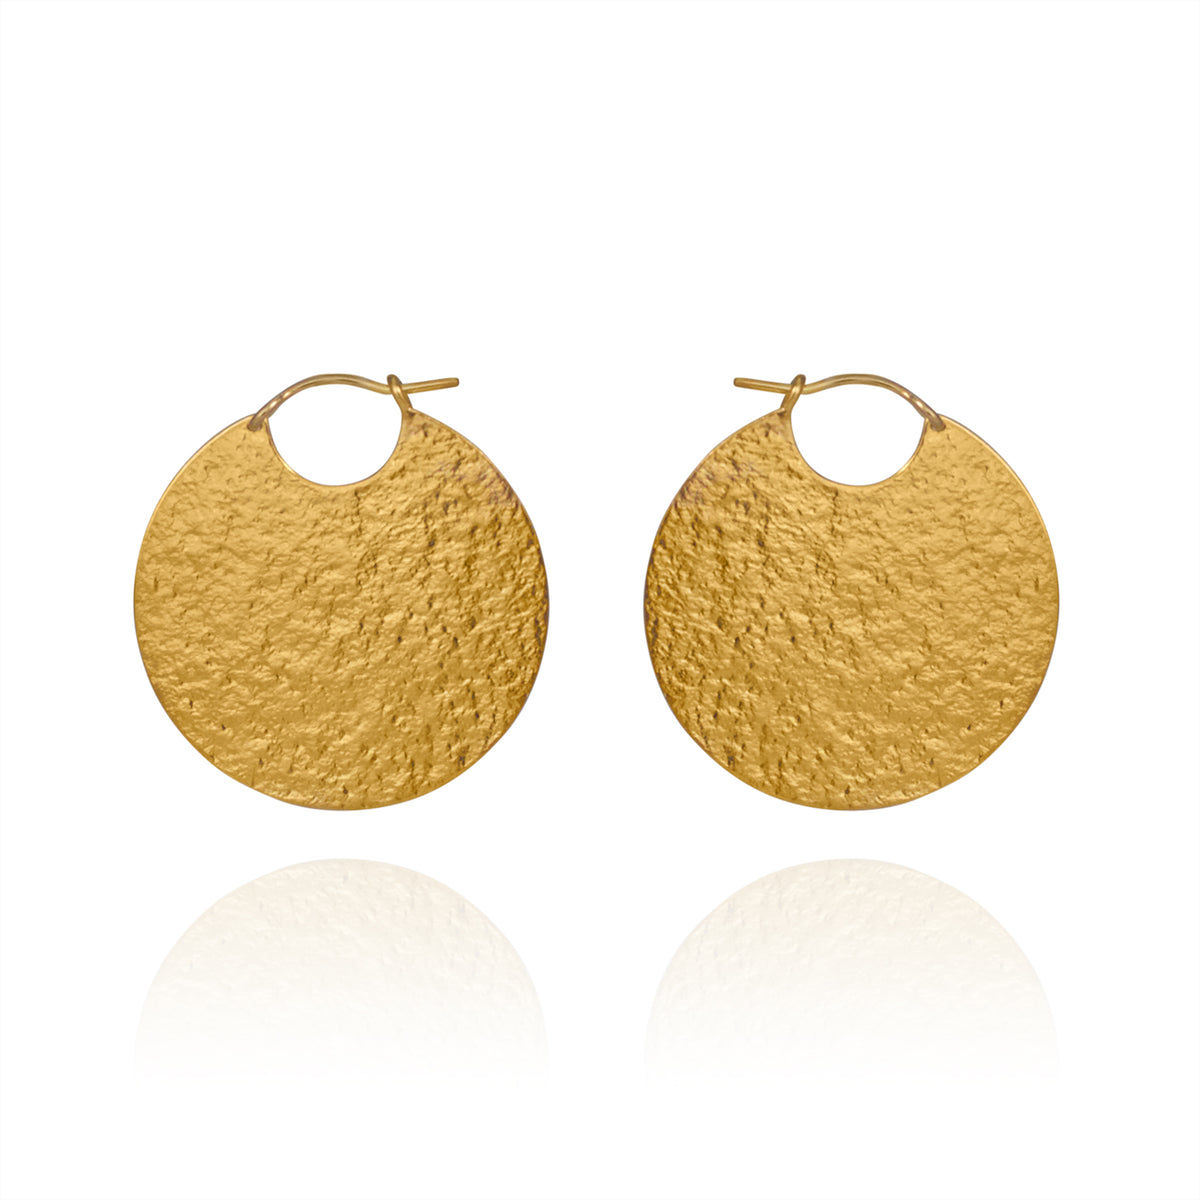 Large gold disc hoop style earrings with textured finish.